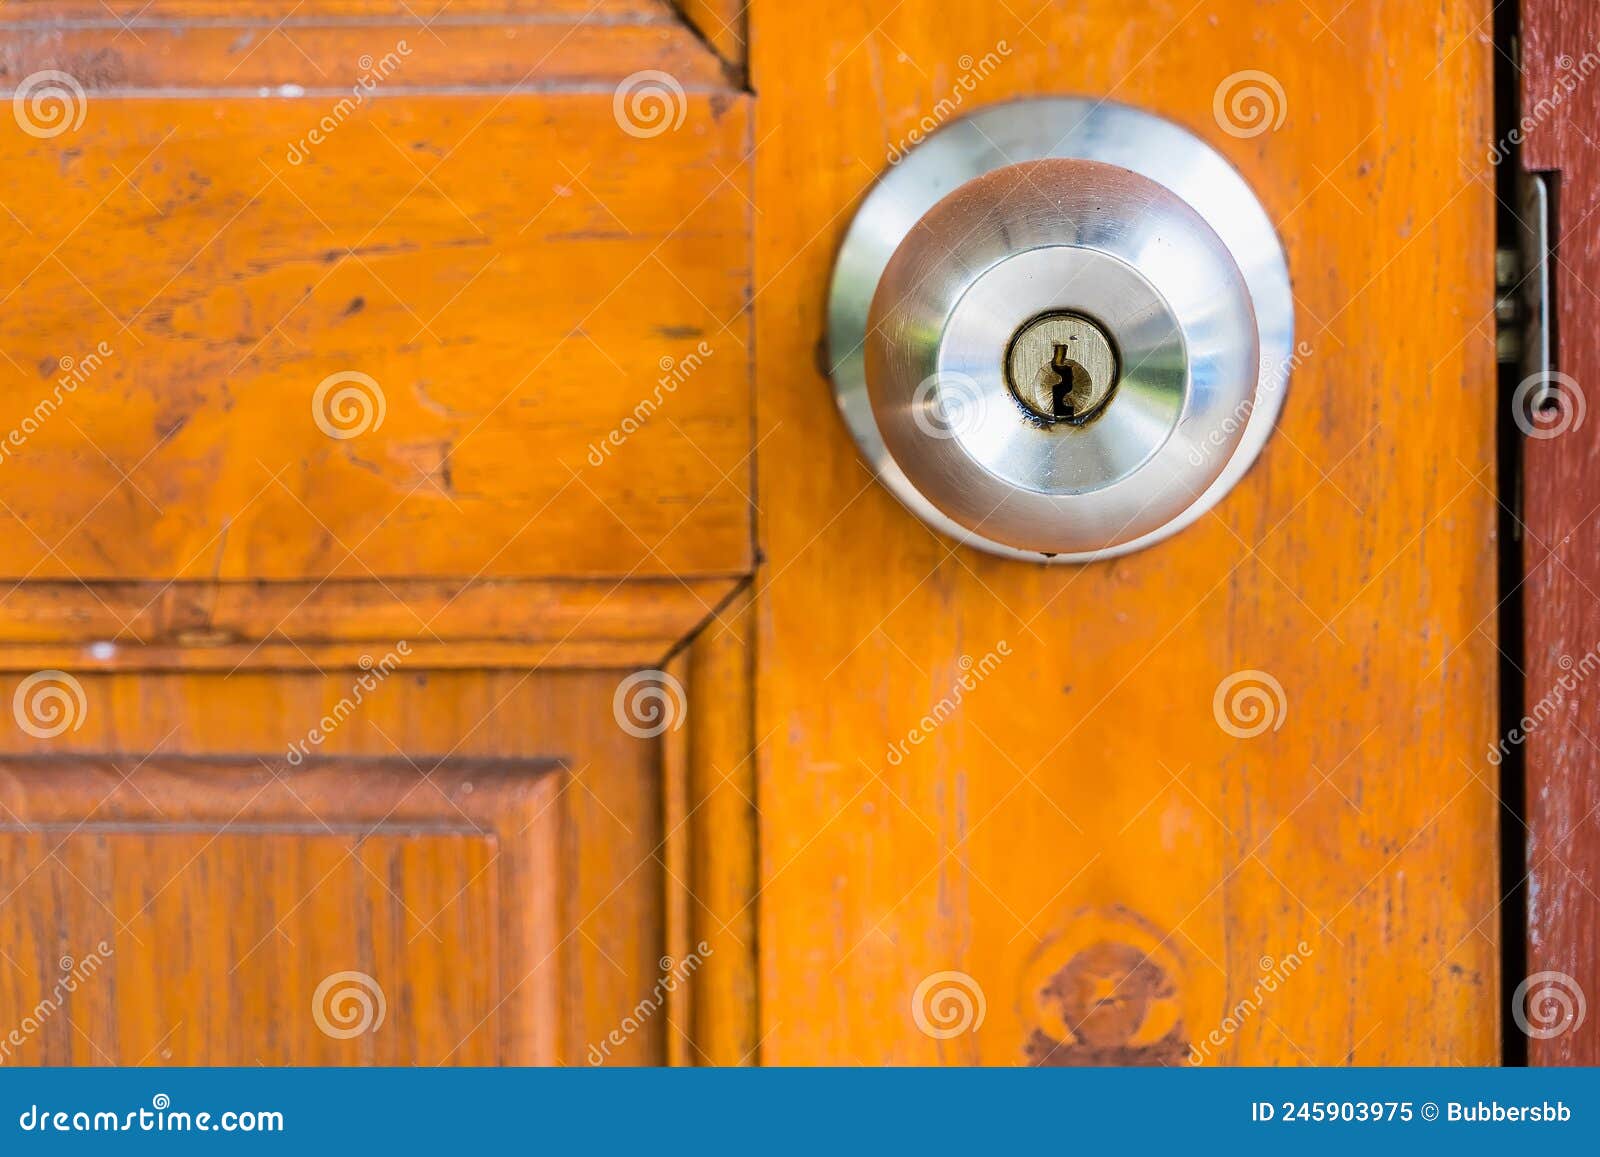 Door Knob and Keyhole on Wooden Door, Close Up Image Stock Image ...